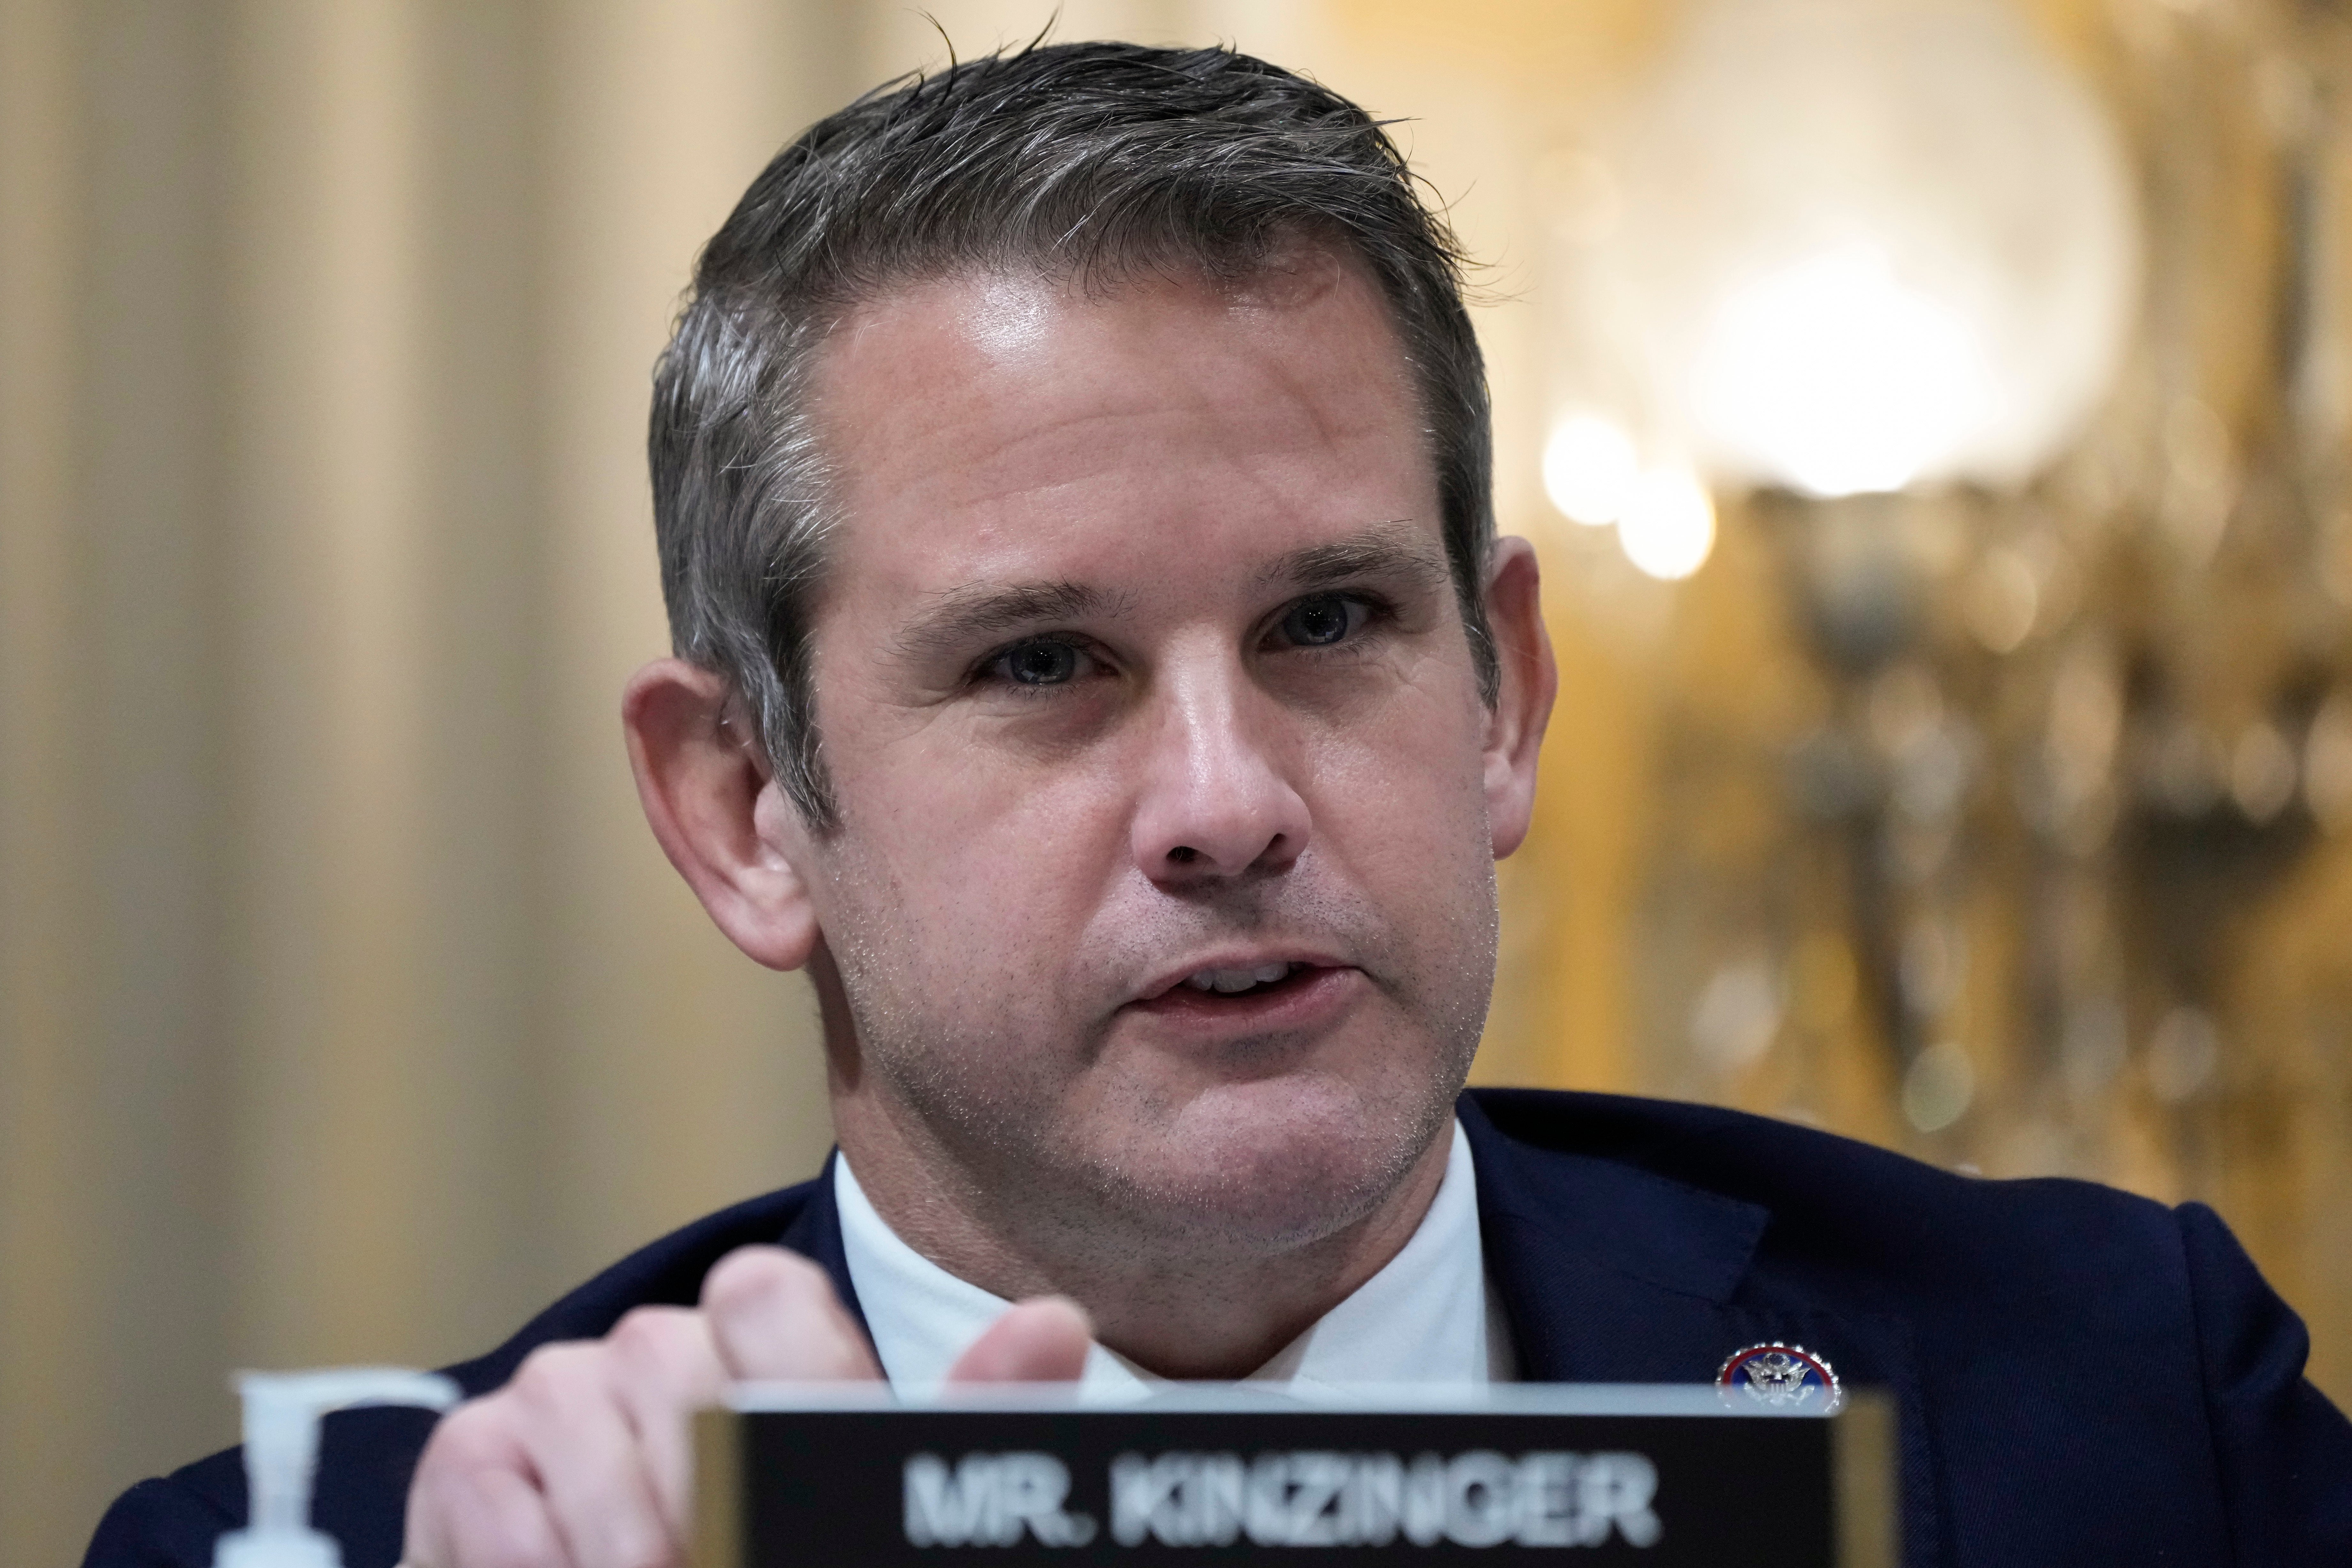 Adam Kinzinger called out Elon Musk for spreading fake stories about the Paul Pelosi attack